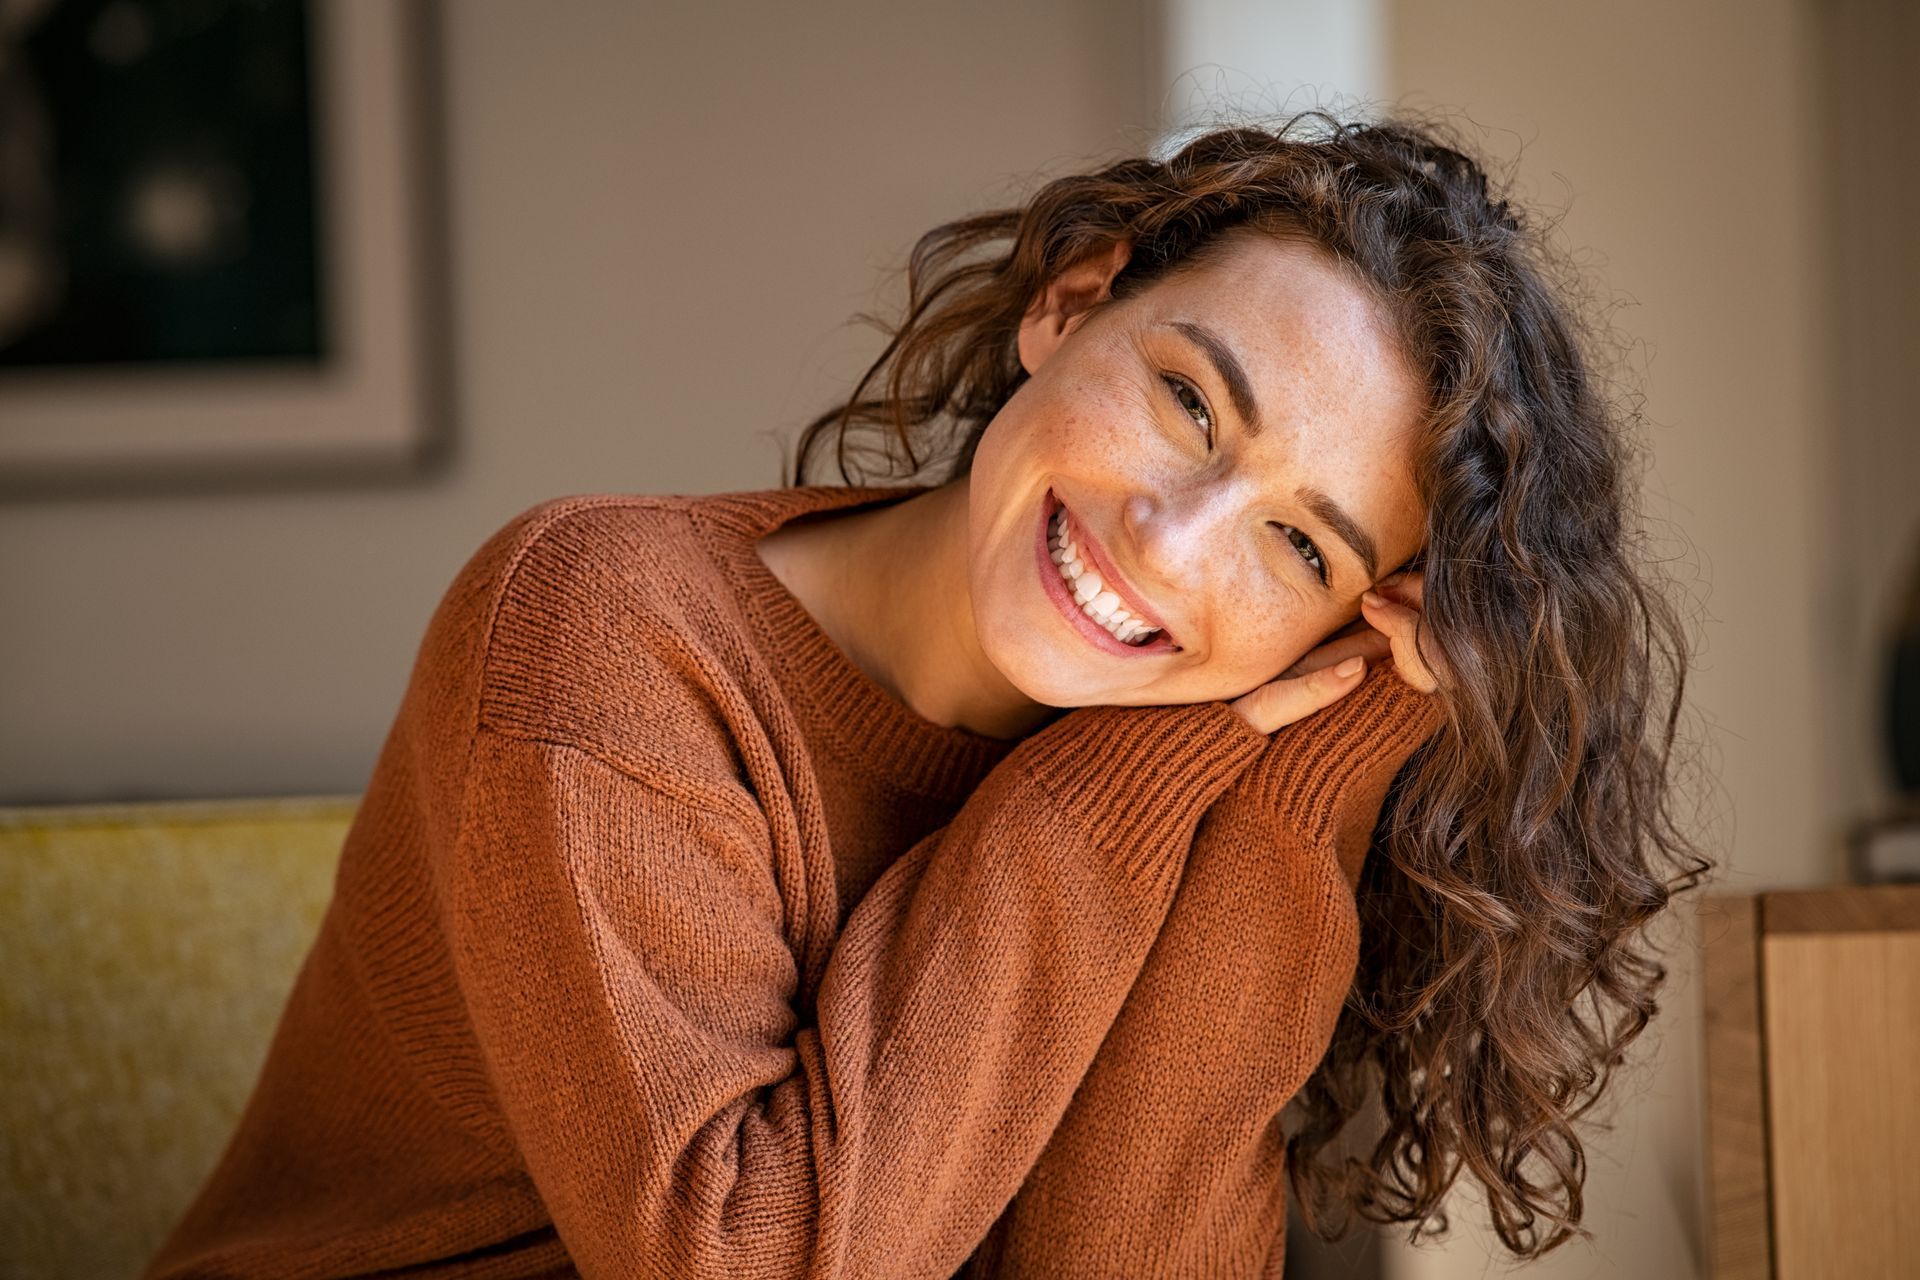 A woman in a brown sweater is smiling while sitting on a couch.